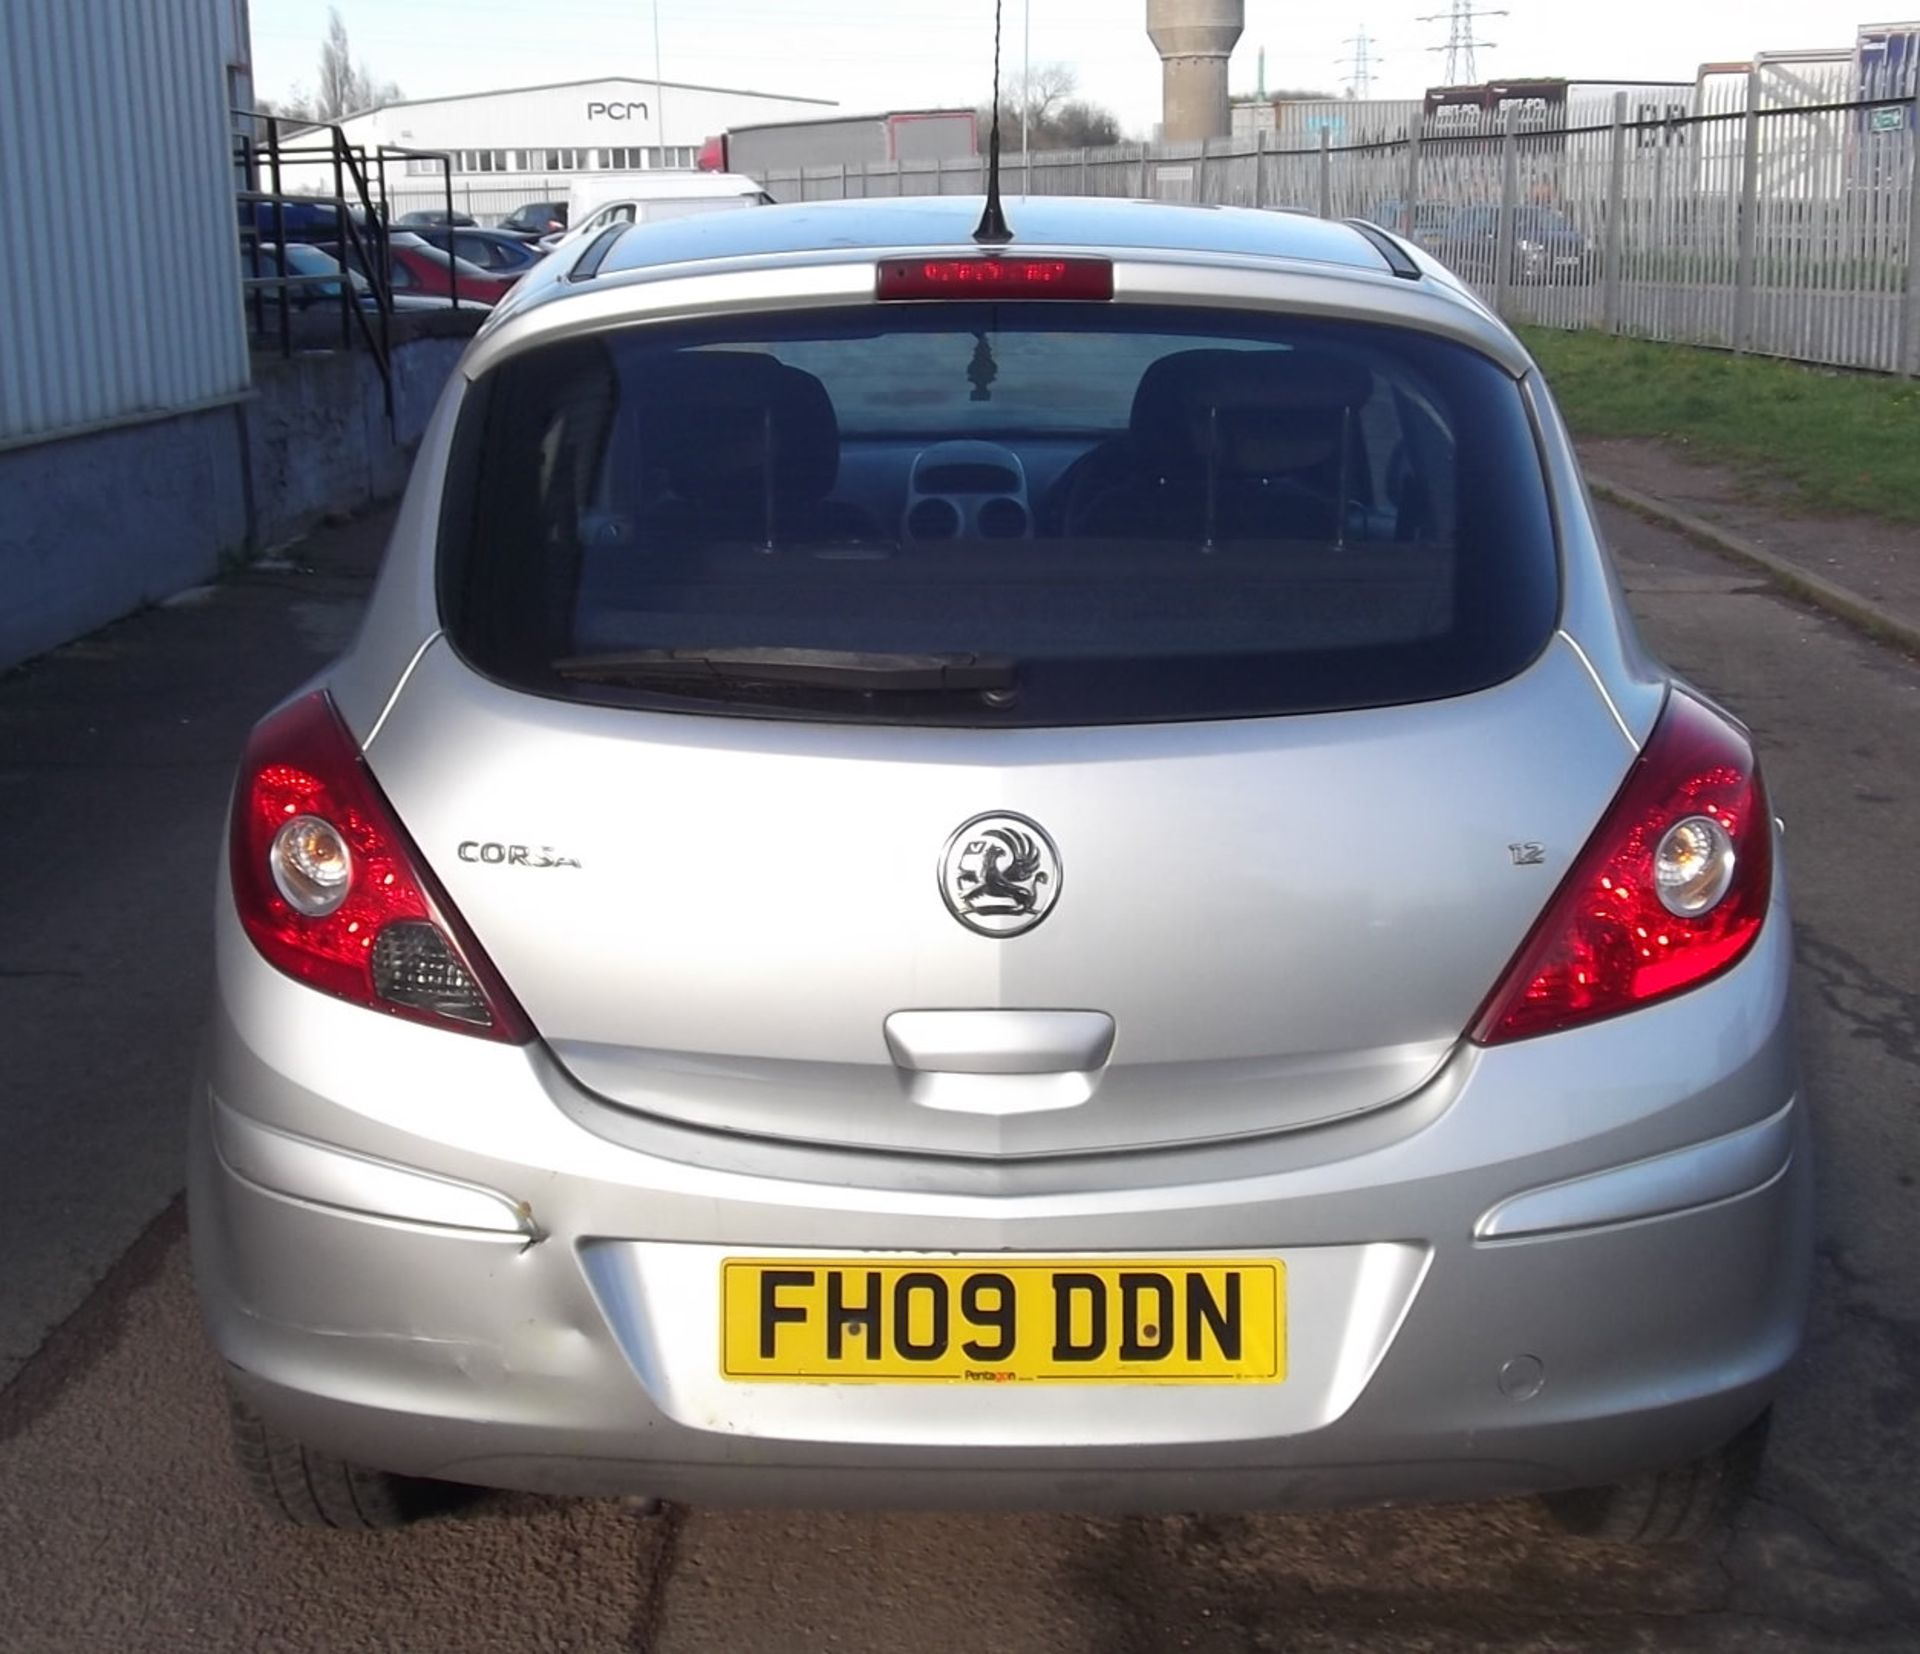 2009 Vauxhall Corsa 1.2 Active 3 Door Hatchback - CL505 - NO VAT ON THE HAMMER - Location: Corby, No - Image 13 of 13